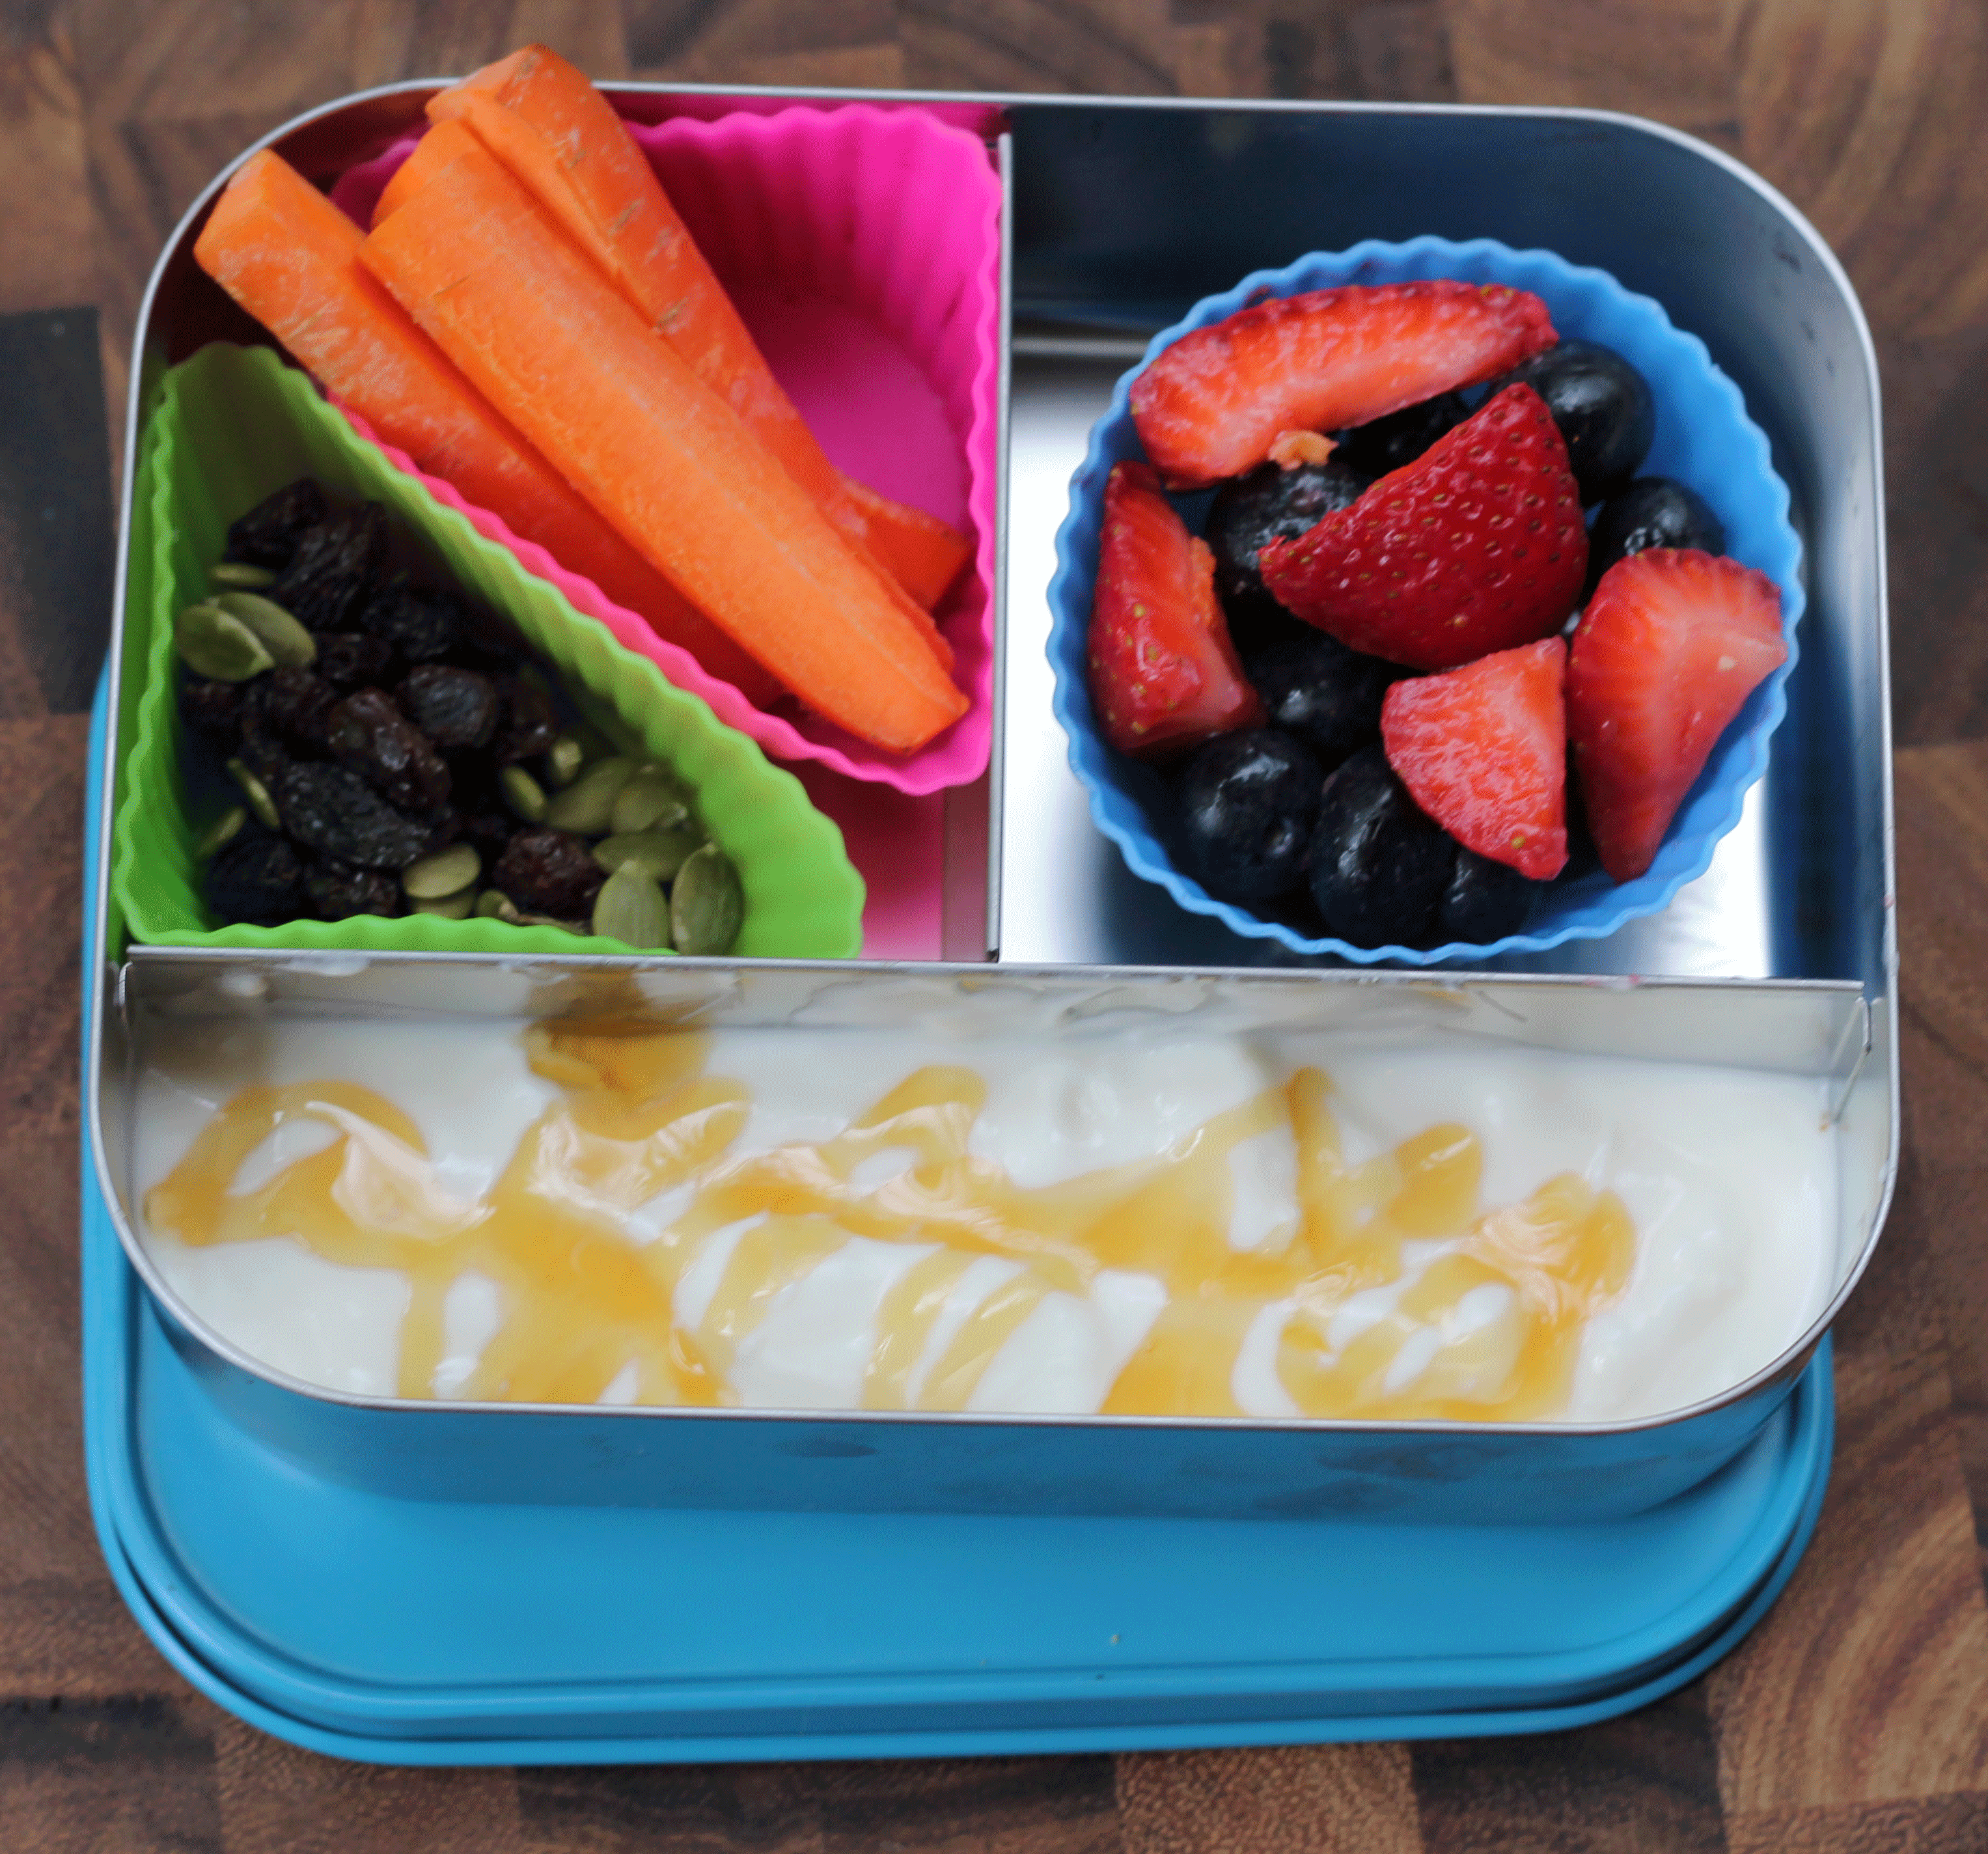 Back to School Lunch Ideas- Yogurt Parfait. SO fun! Pack this with your child's favorite yogurt flavor and fruit and let them go wild!